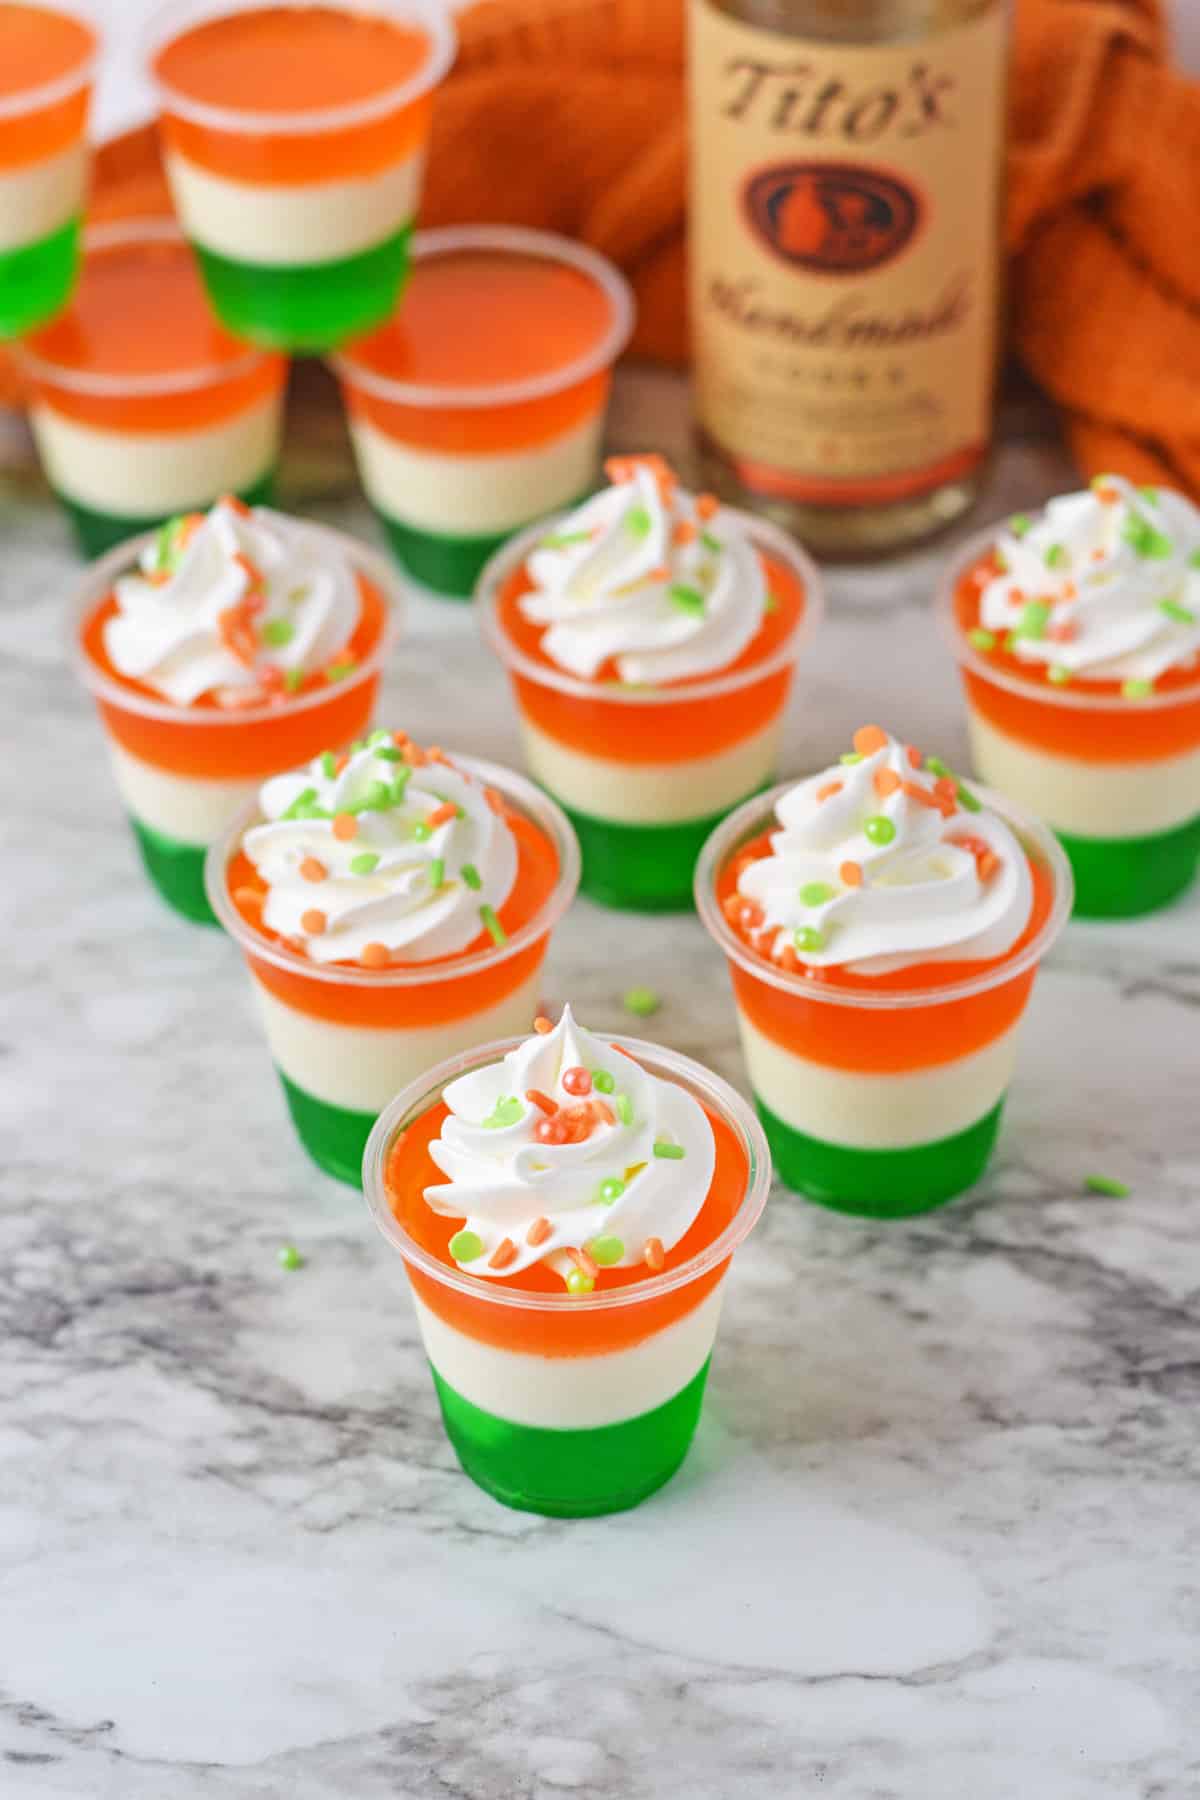 Whipped cream and sprinkle topped Irish flag jello shots with bottle of Tito's vodka behind them.